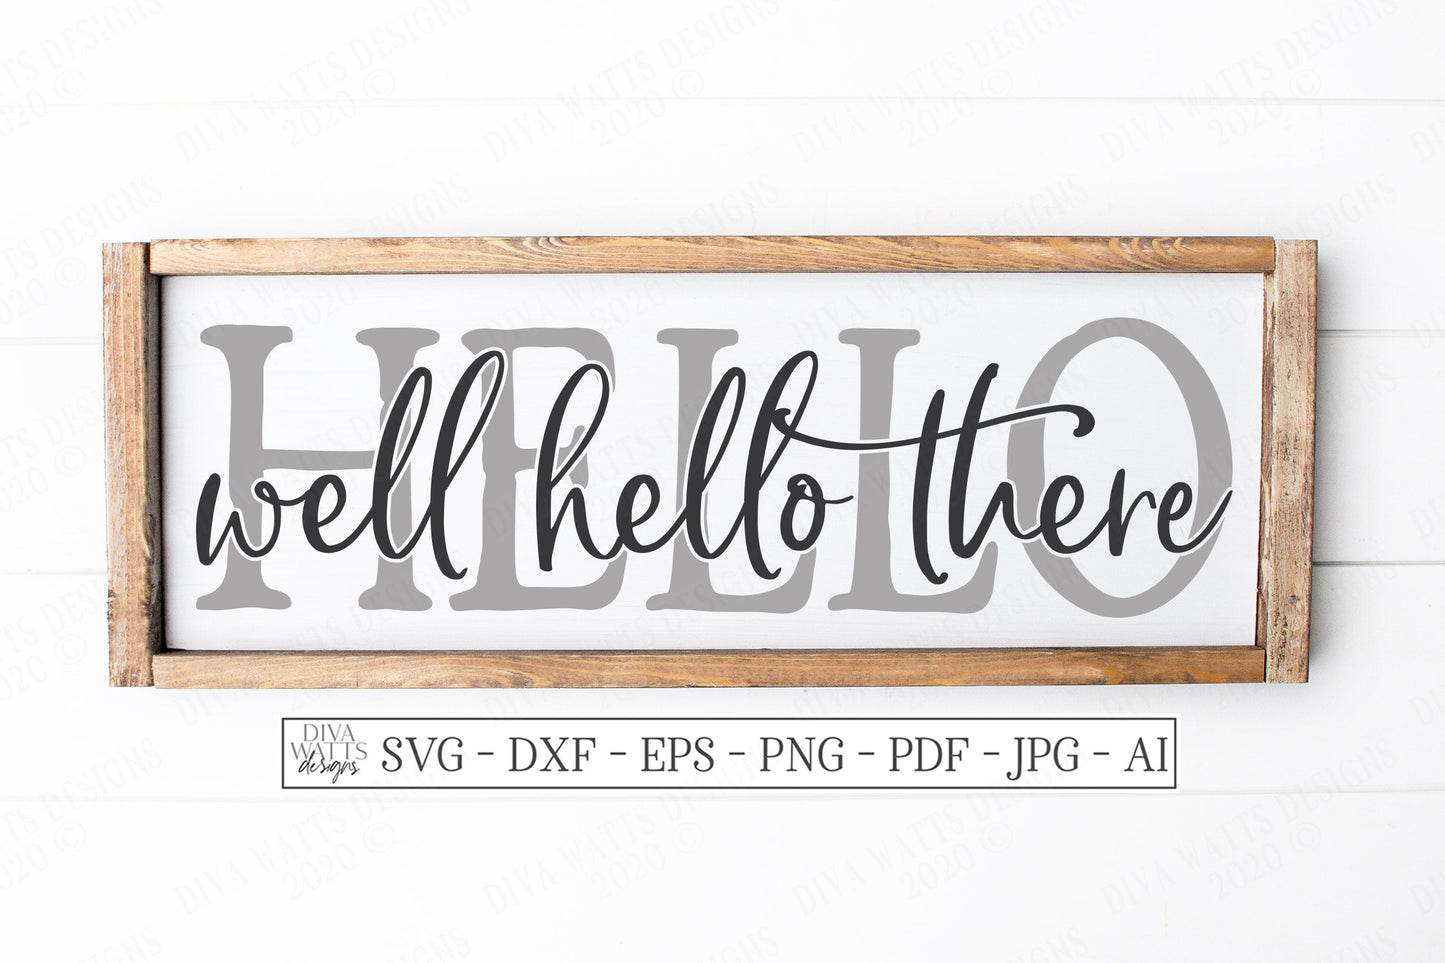 Well Hello There | Cutting File | Vinyl Stencil HTV | Farmhouse Rustic Sign | Greeting | Front Porch | Door | Mat | eps dxf | Welcome